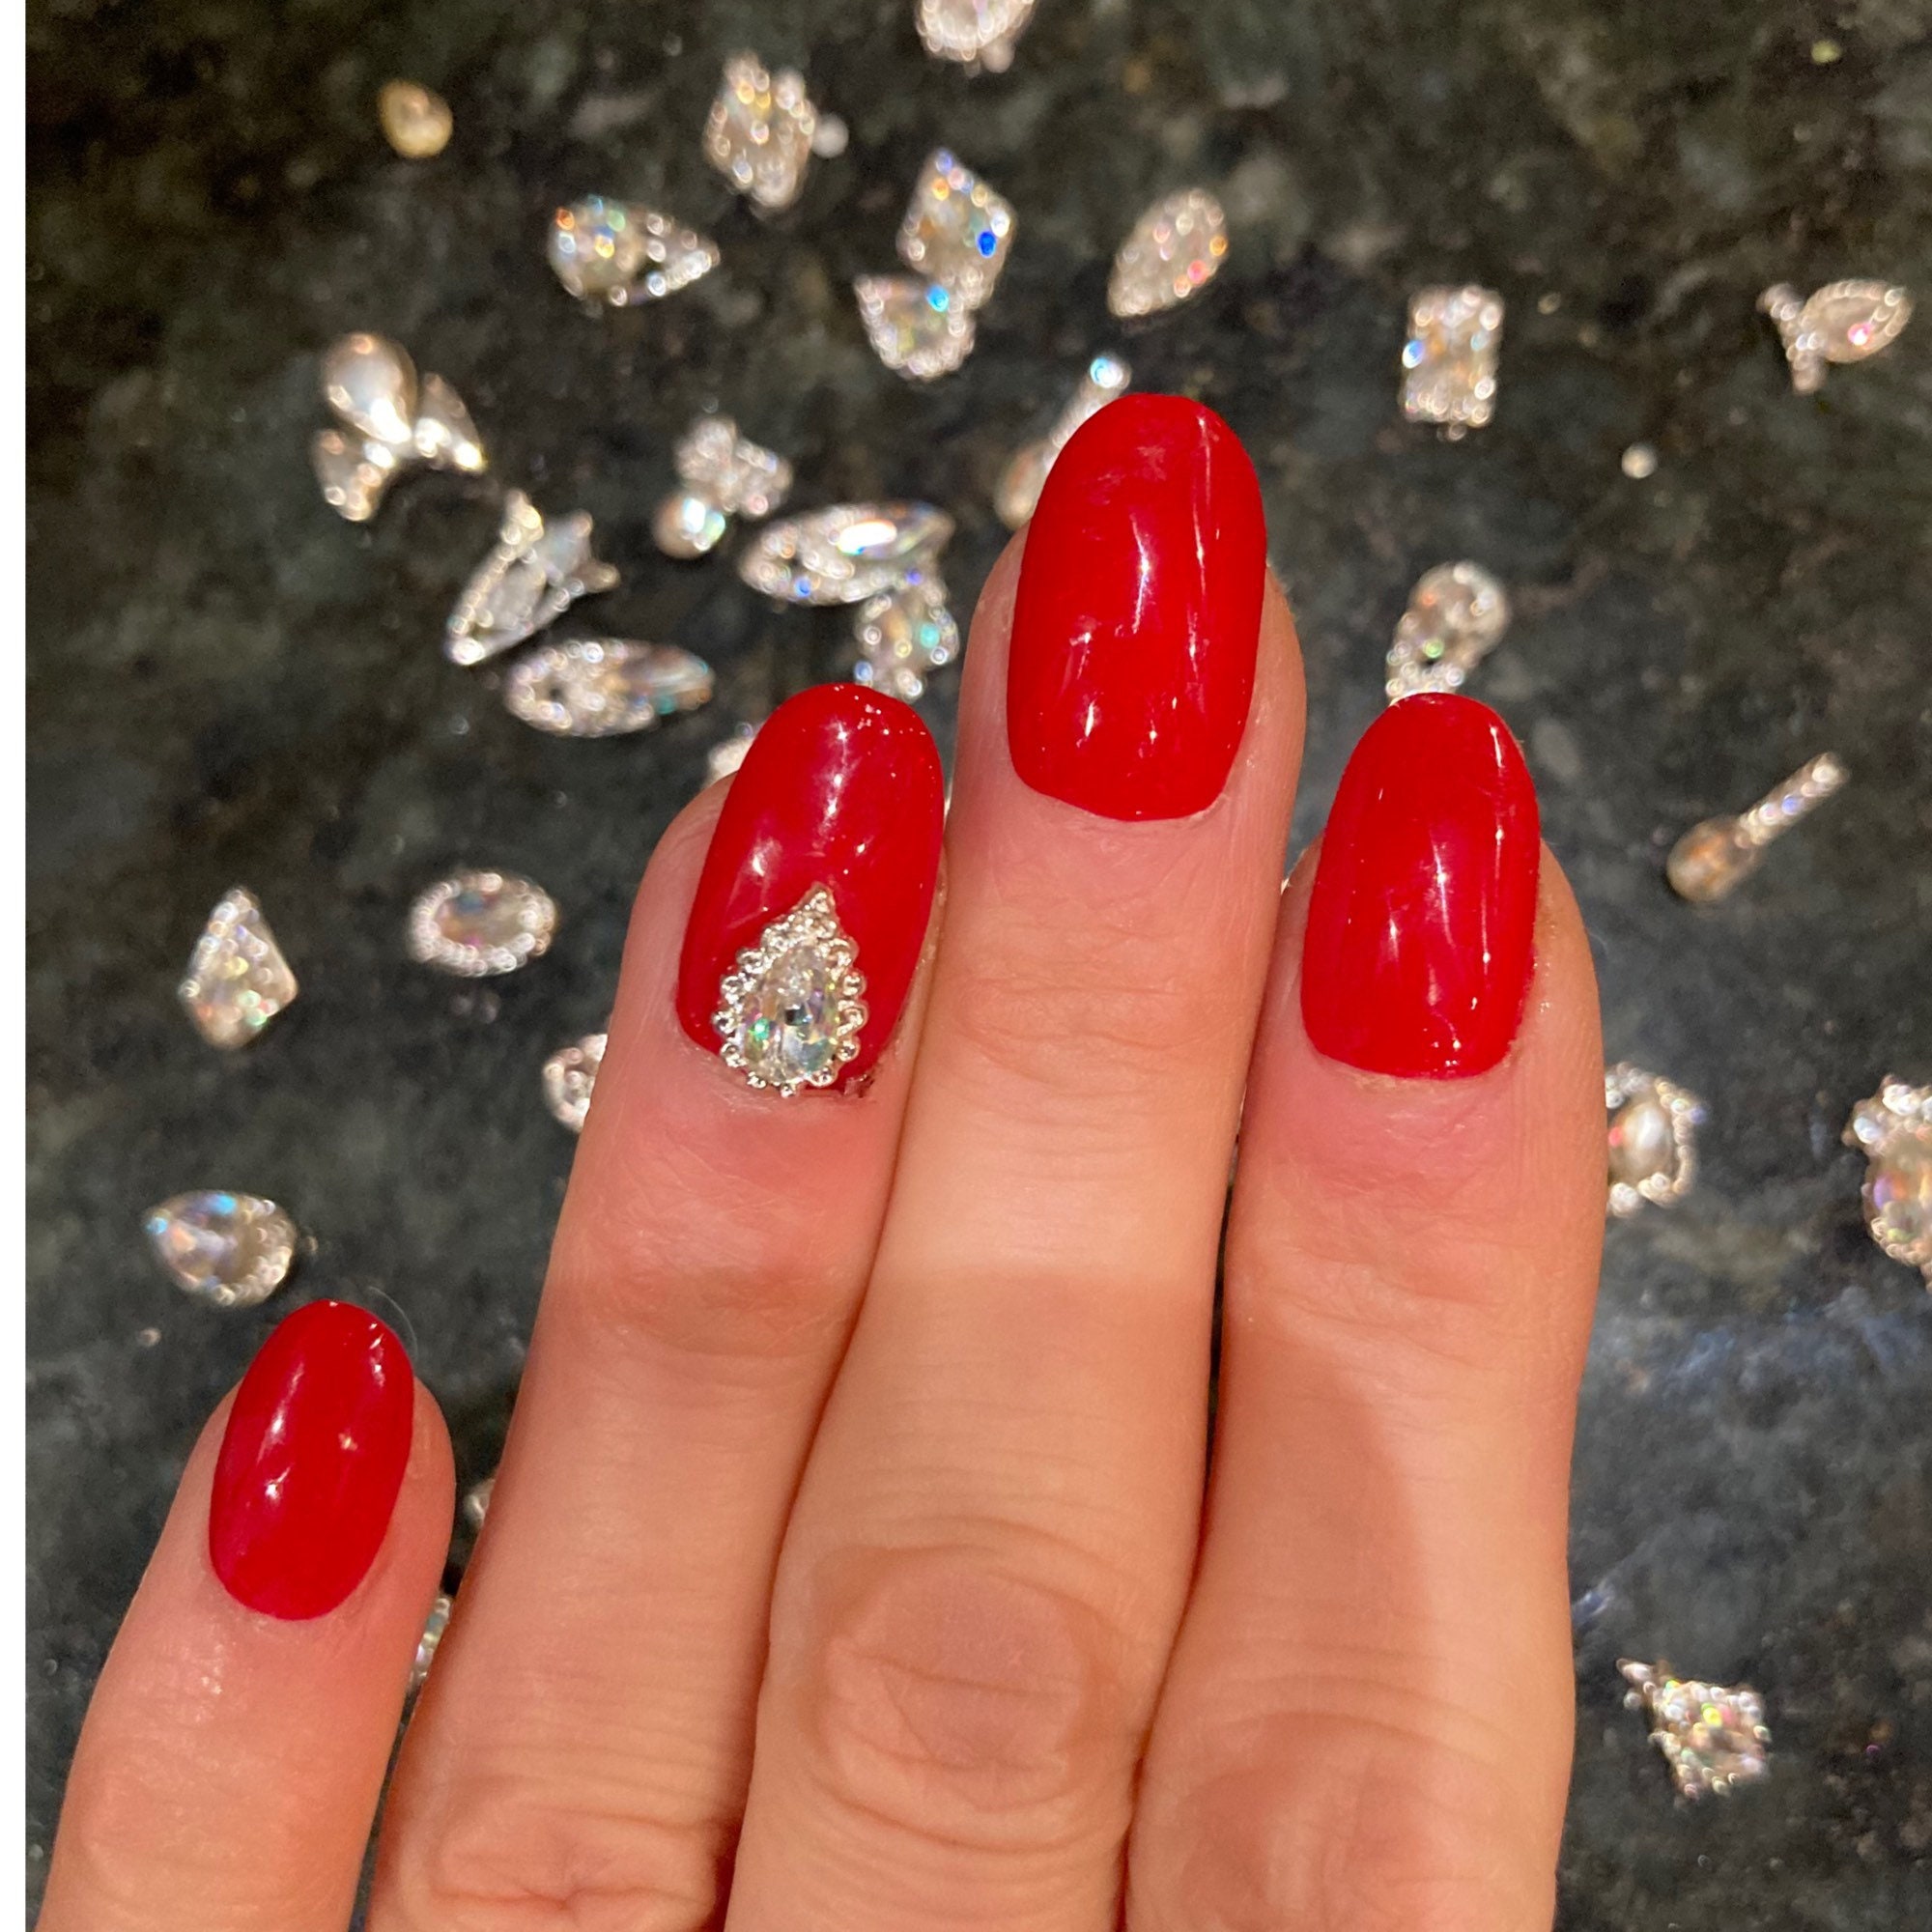 Sexy Classy Red Nails With Oversized Rhinestone Jewelry Clusters/gel Press  on Luxury Nails/glamour Nails -  Norway